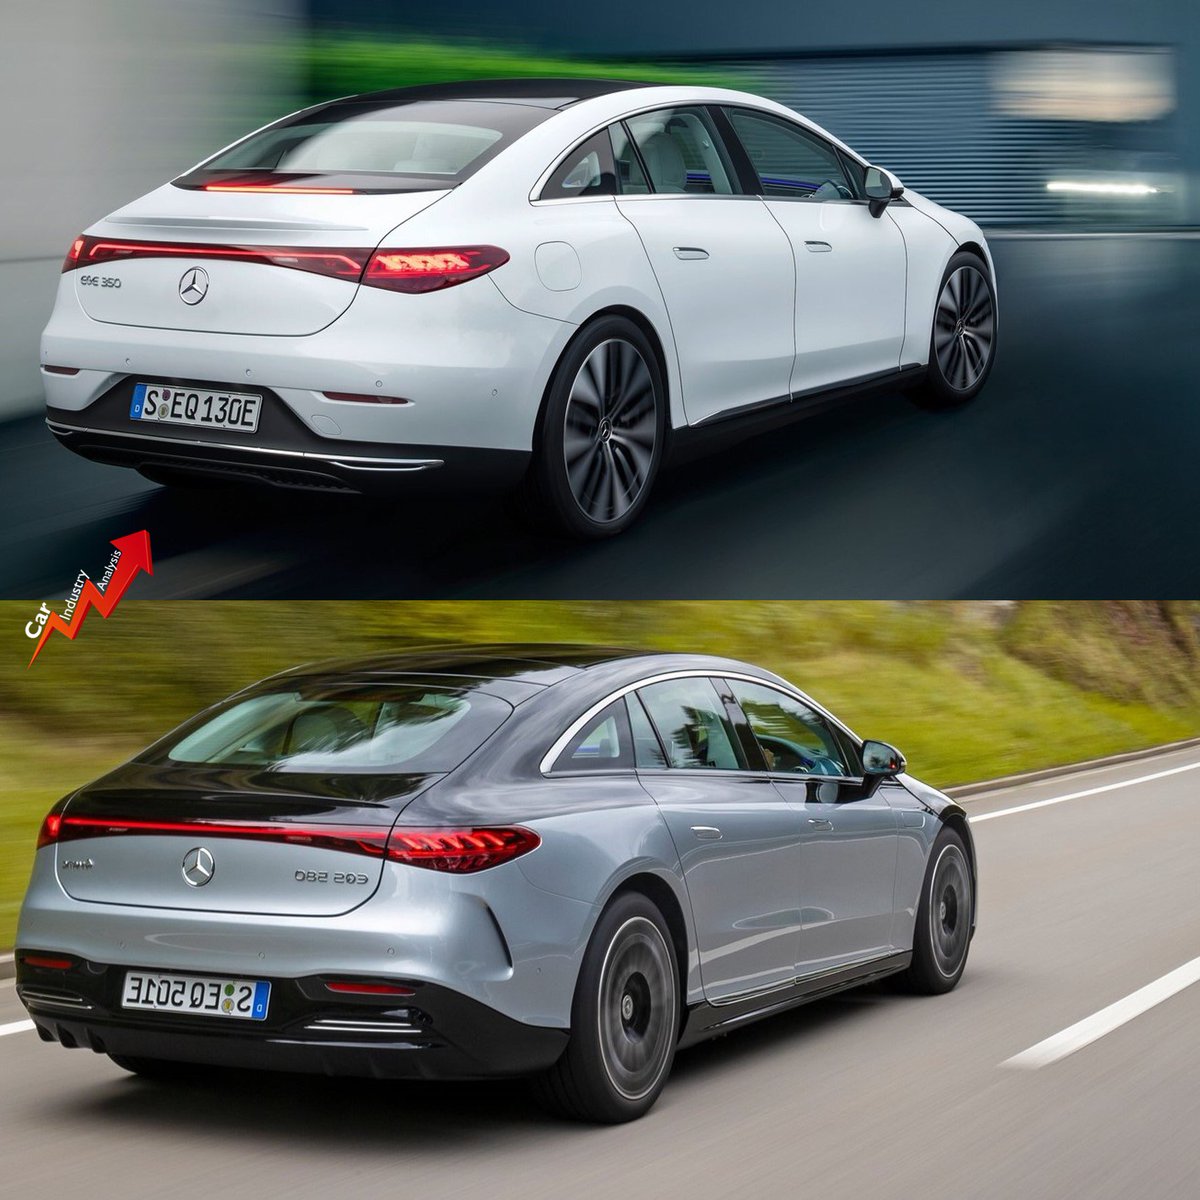 Regardless the impressive performance specs, the new #MercedesEQE is nothing different than a shorter version of the also impressive #MercedesEQS. Although the S, M, L and XL sizes in cars is not a new trend, it’s becoming more evident and boring than ever.
#carindustryanalysis